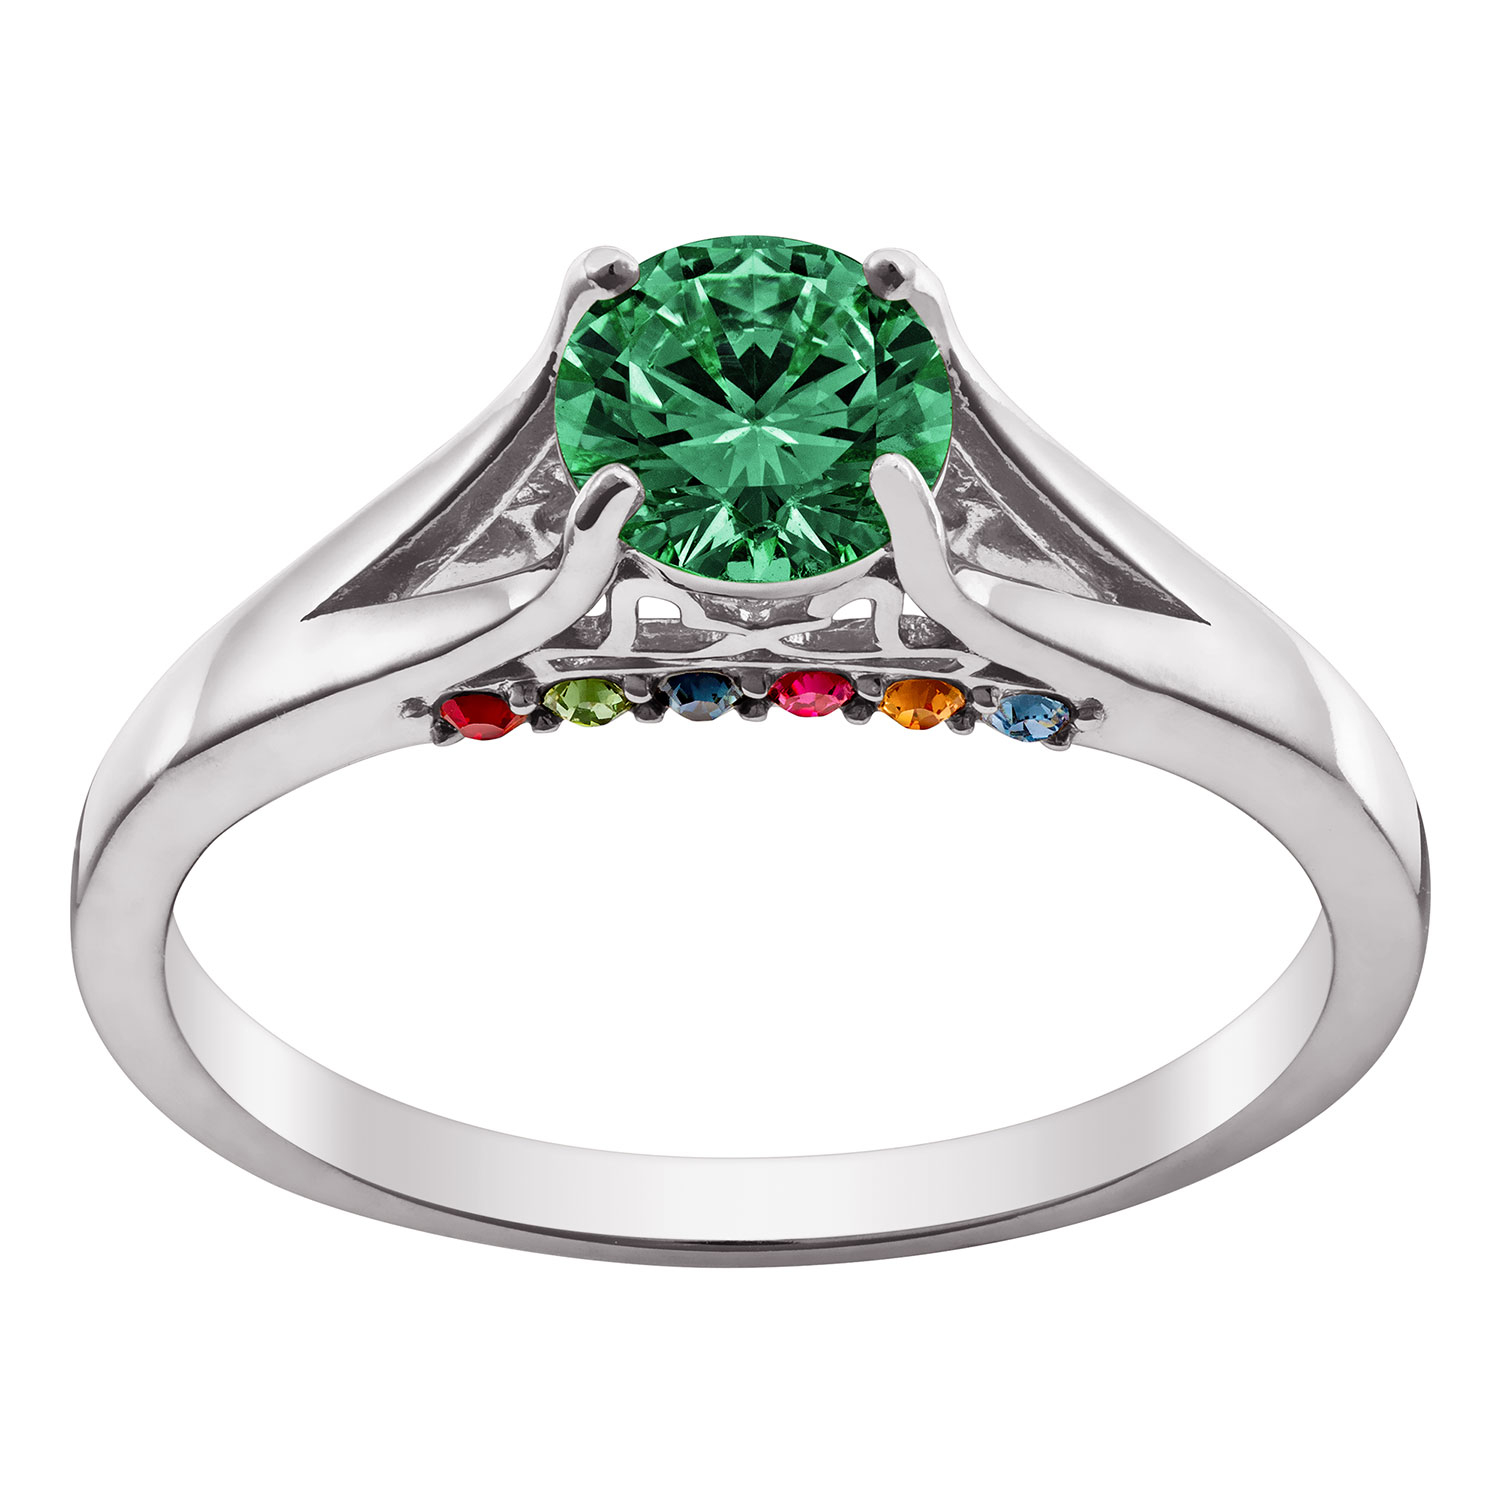 Mother/Grandmother's Birthstone Ring